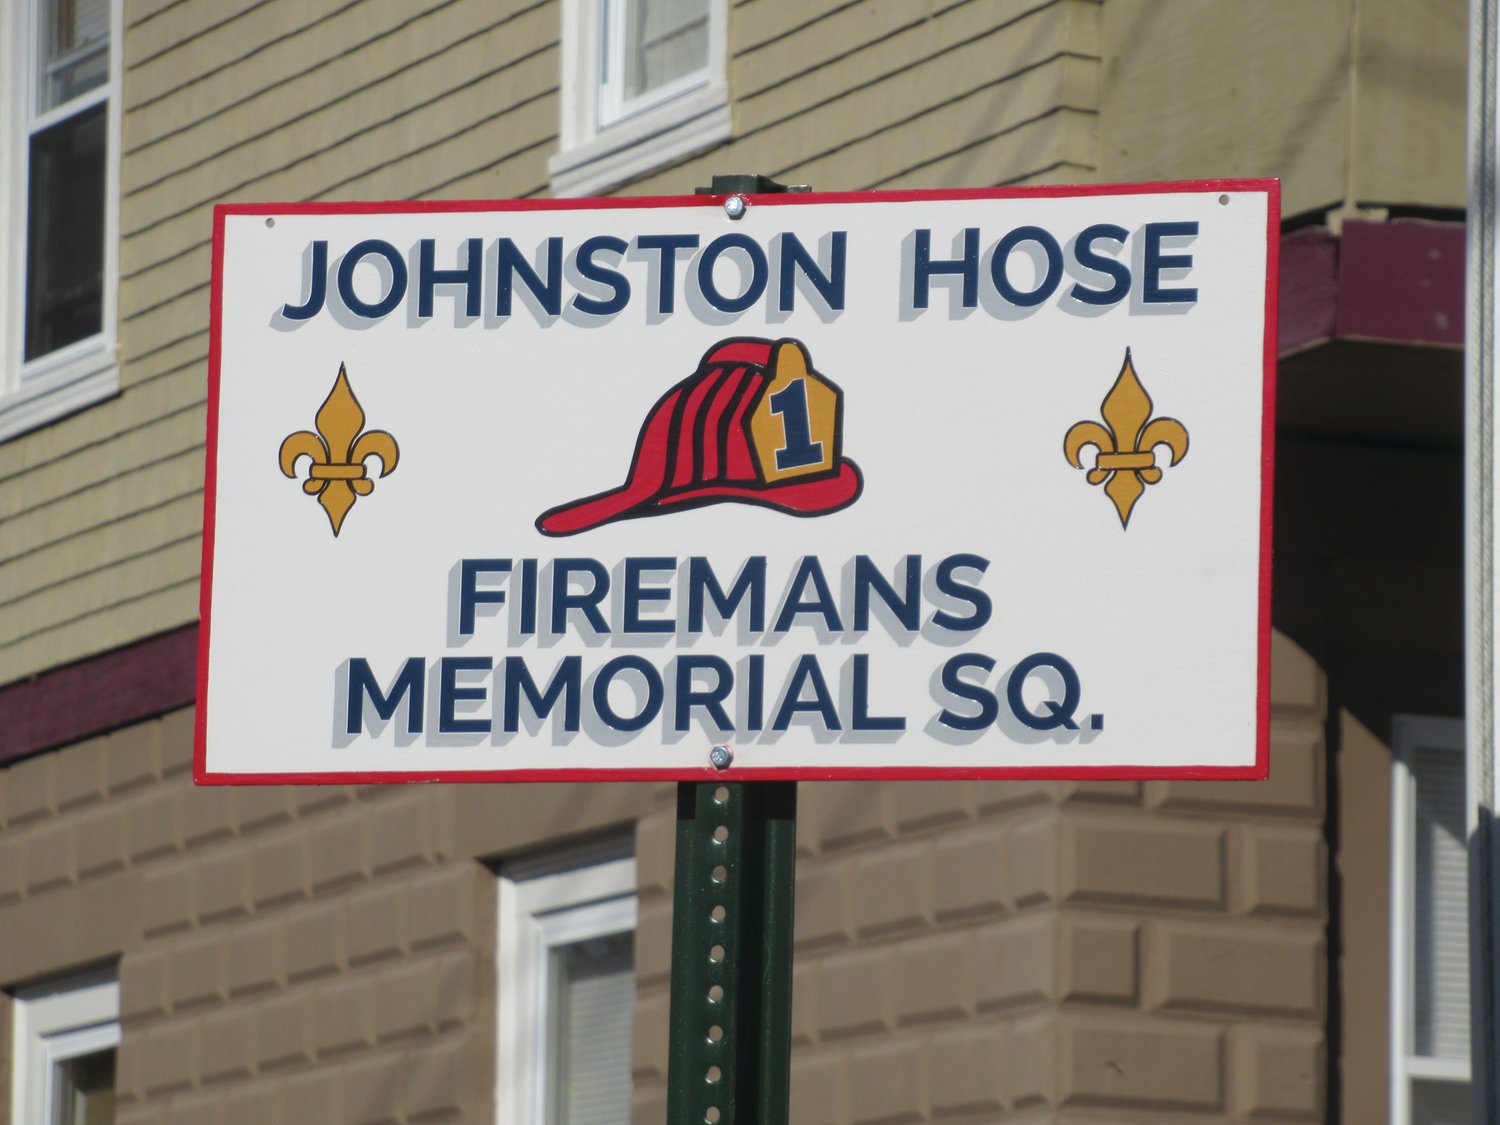 SPECIALTY SIGN: John Ermaian, popular and long-time owner of Ermaian Signs, donated this super sign that’s located at the upgraded memorial square in honor of all deceased firefighters who served the Johnston Fire Department.